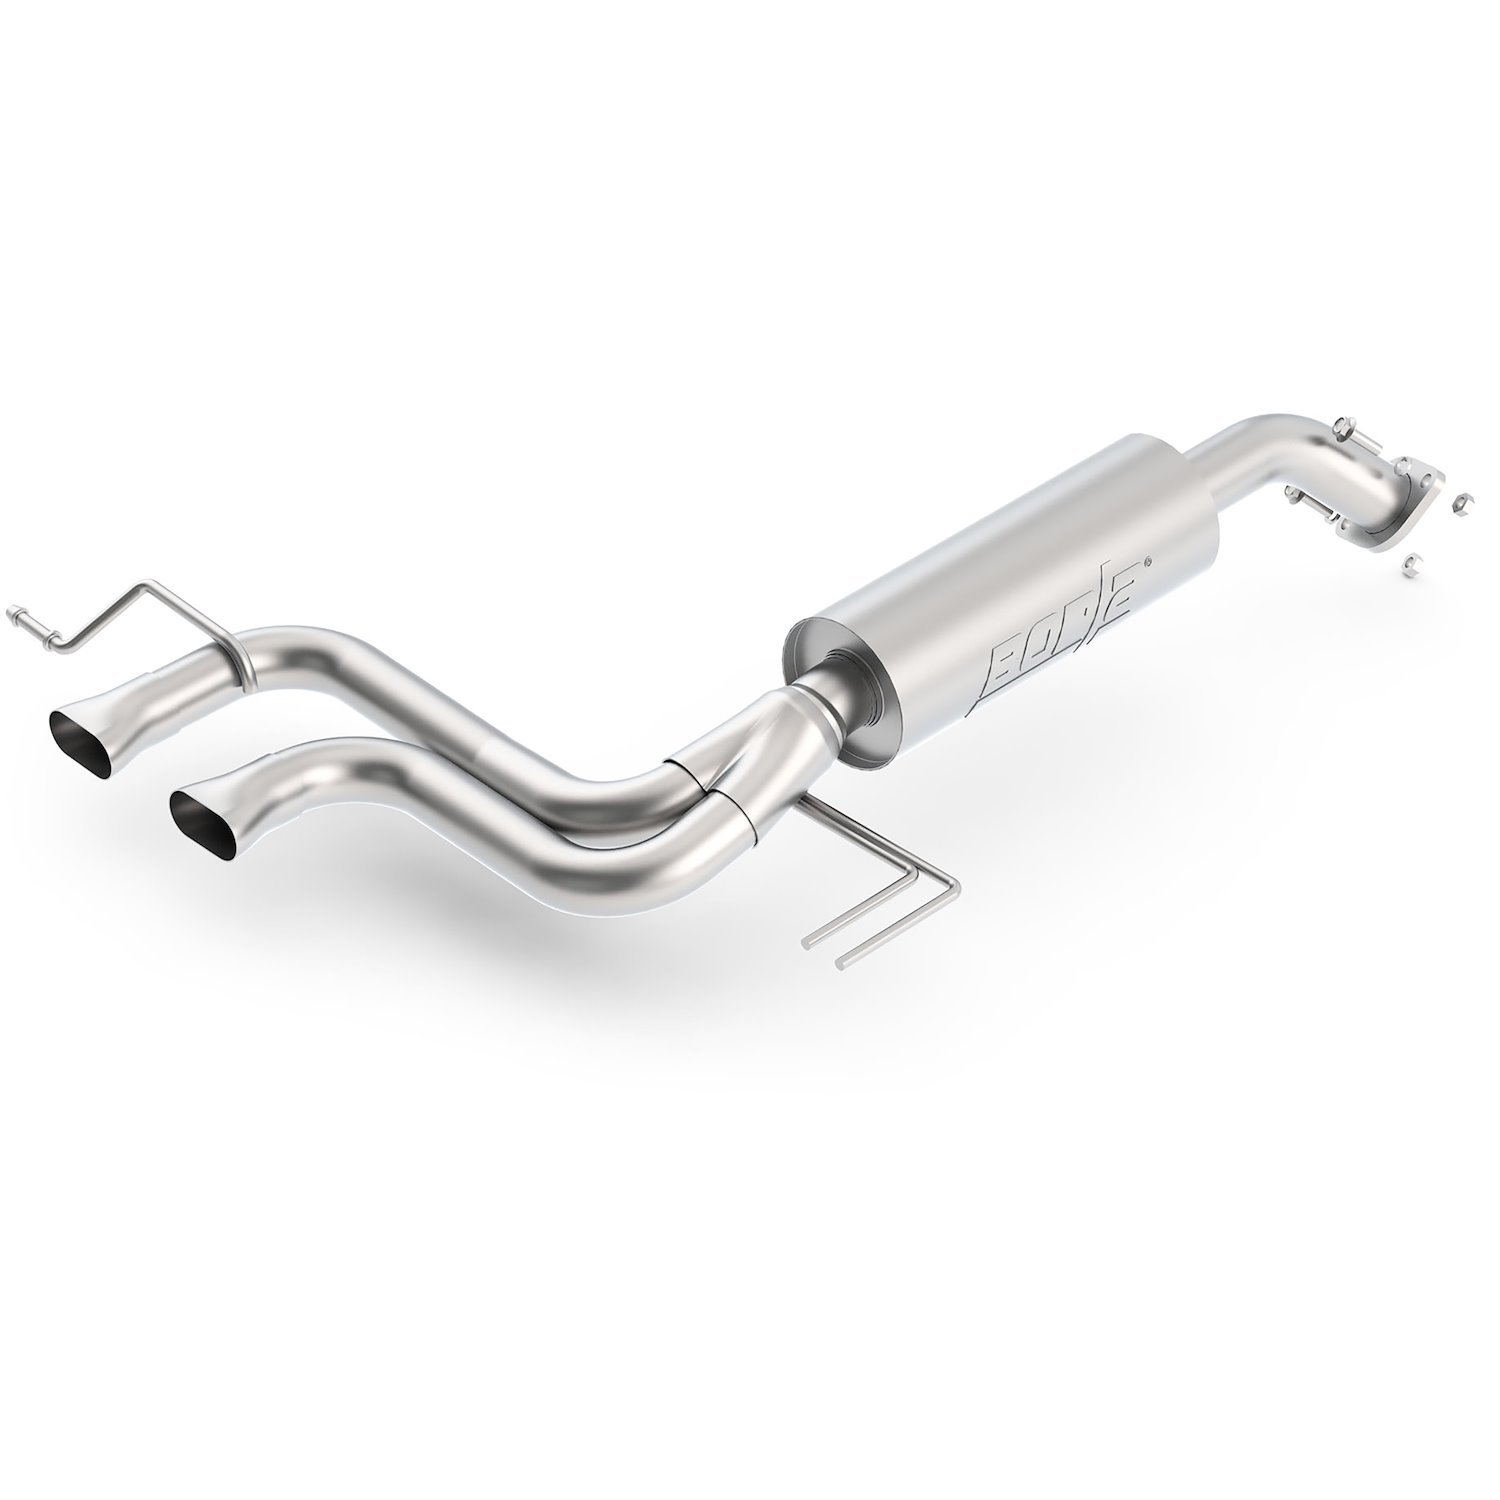 Hyundai Veloster Rear-Section Exhaust System